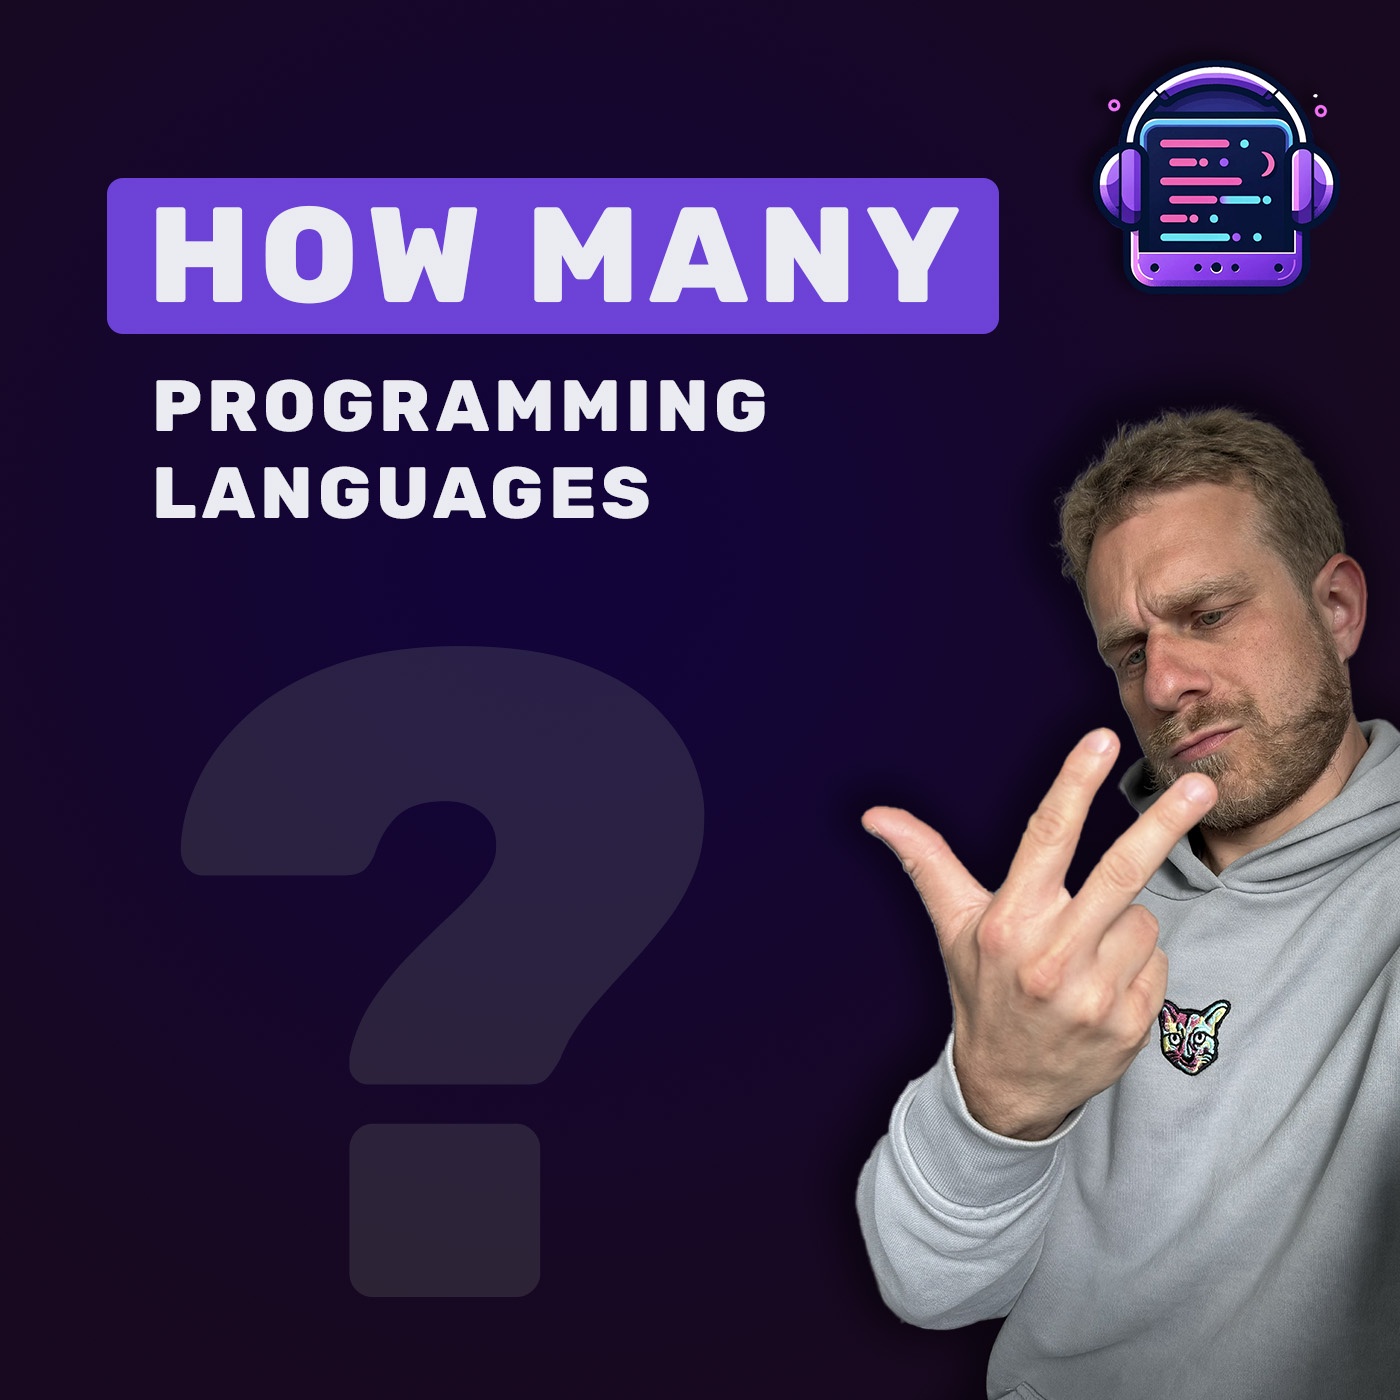 How many programming languages should you learn & know?